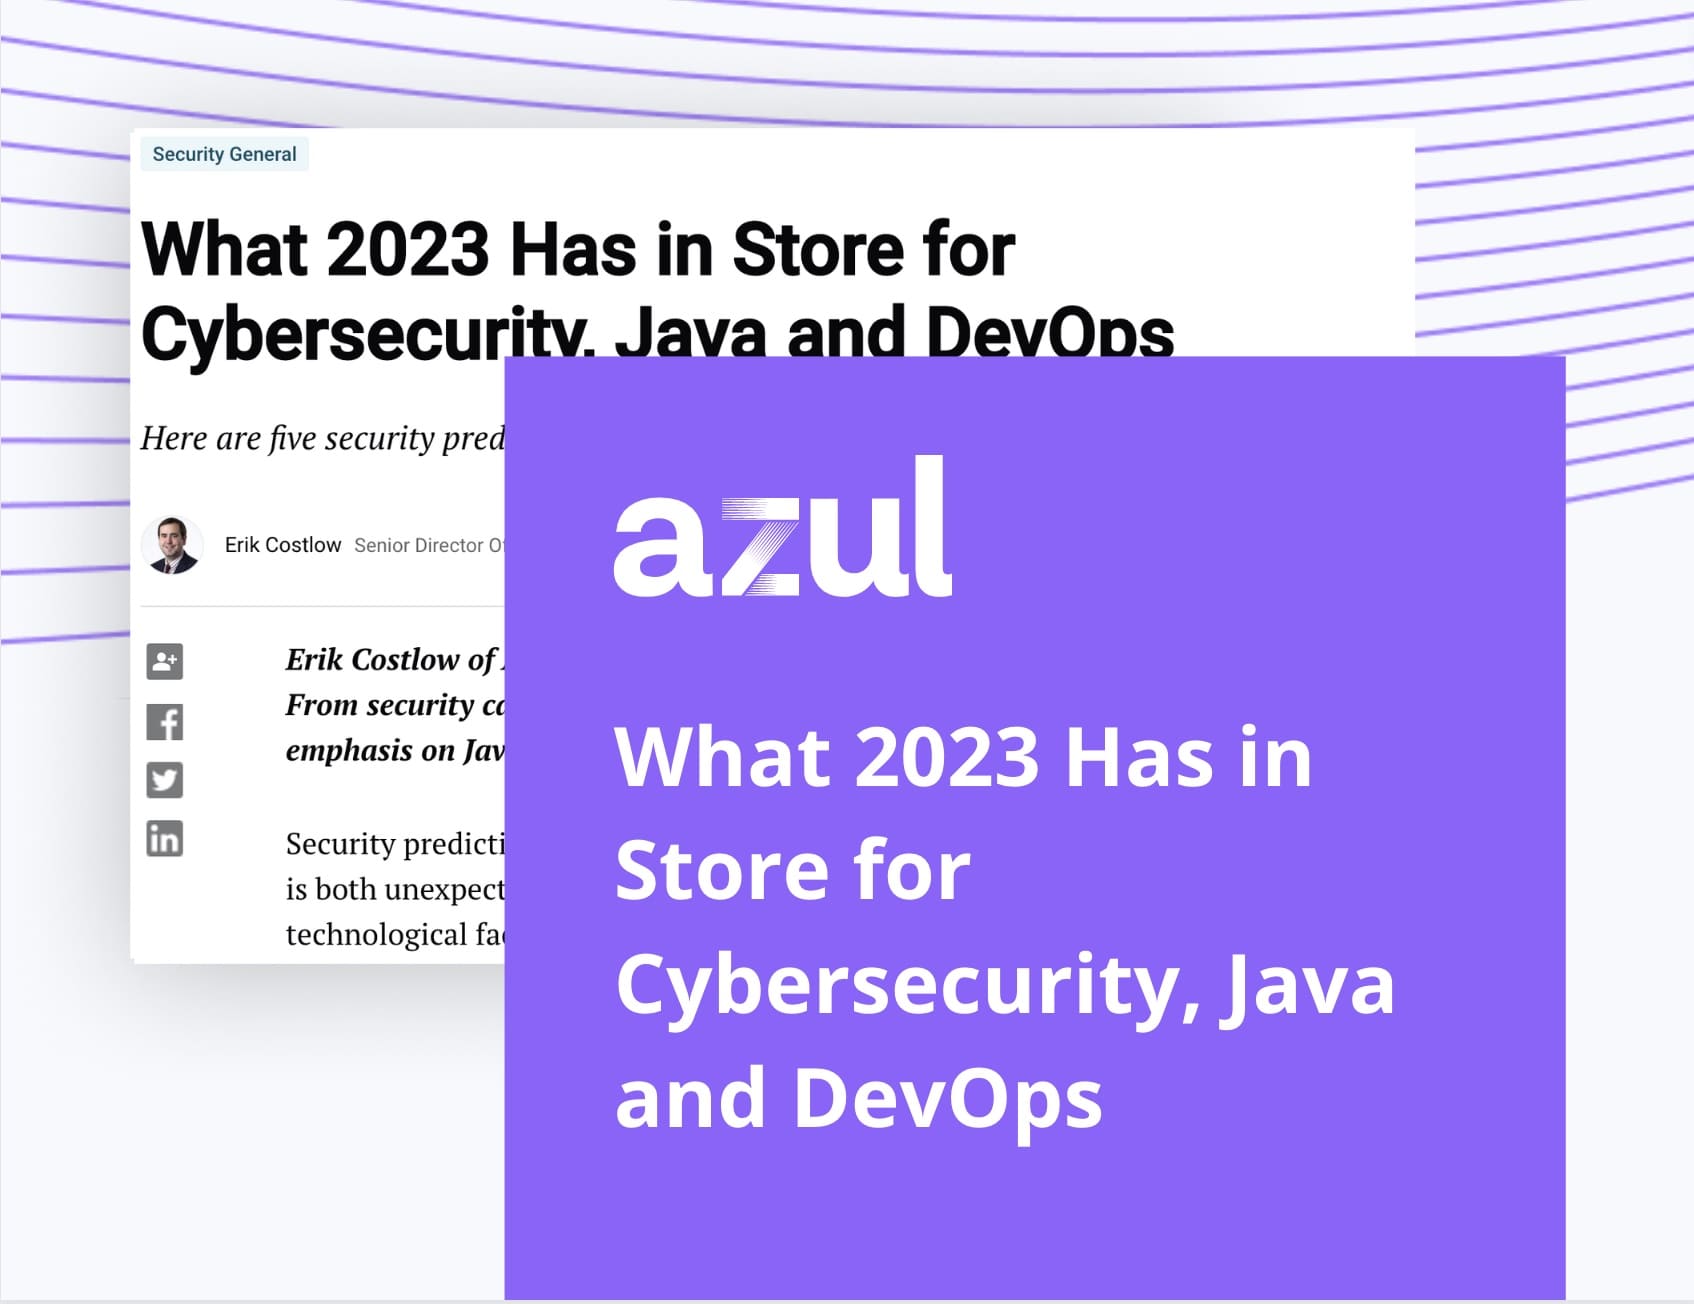 What 2023 Has in Store for Cybersecurity, Java and DevOps